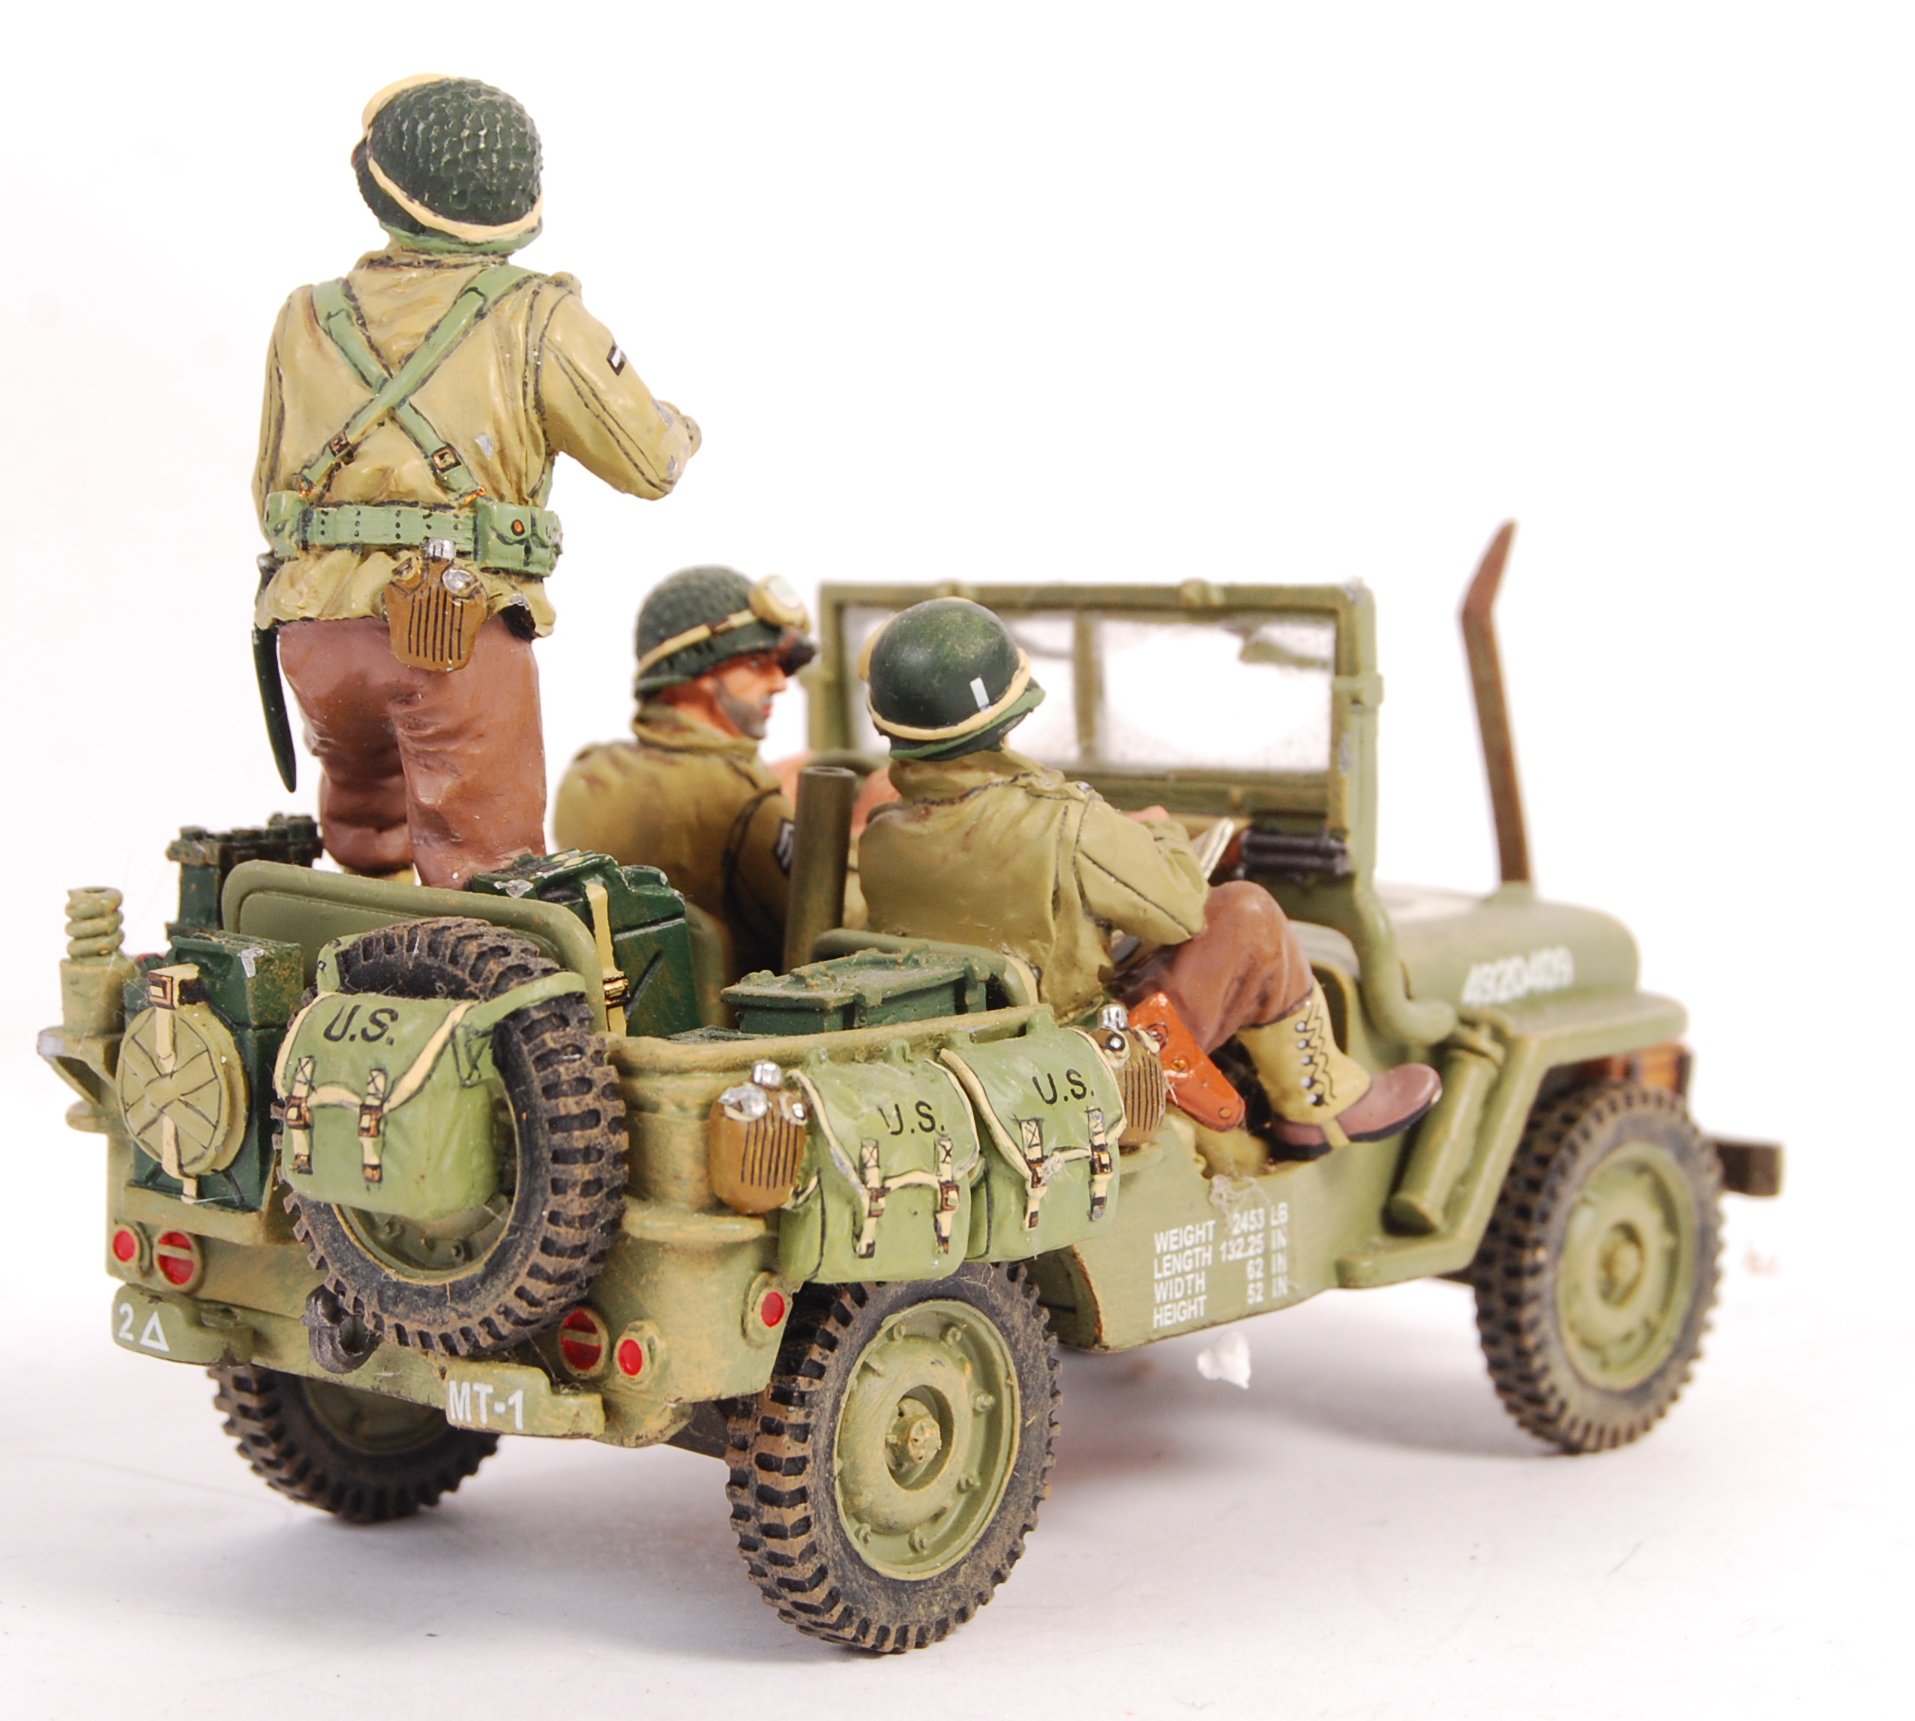 KING & COUNTRY BOXED 1:30 SCALE MODEL D.DAY'44 VEHICLE - Image 4 of 5